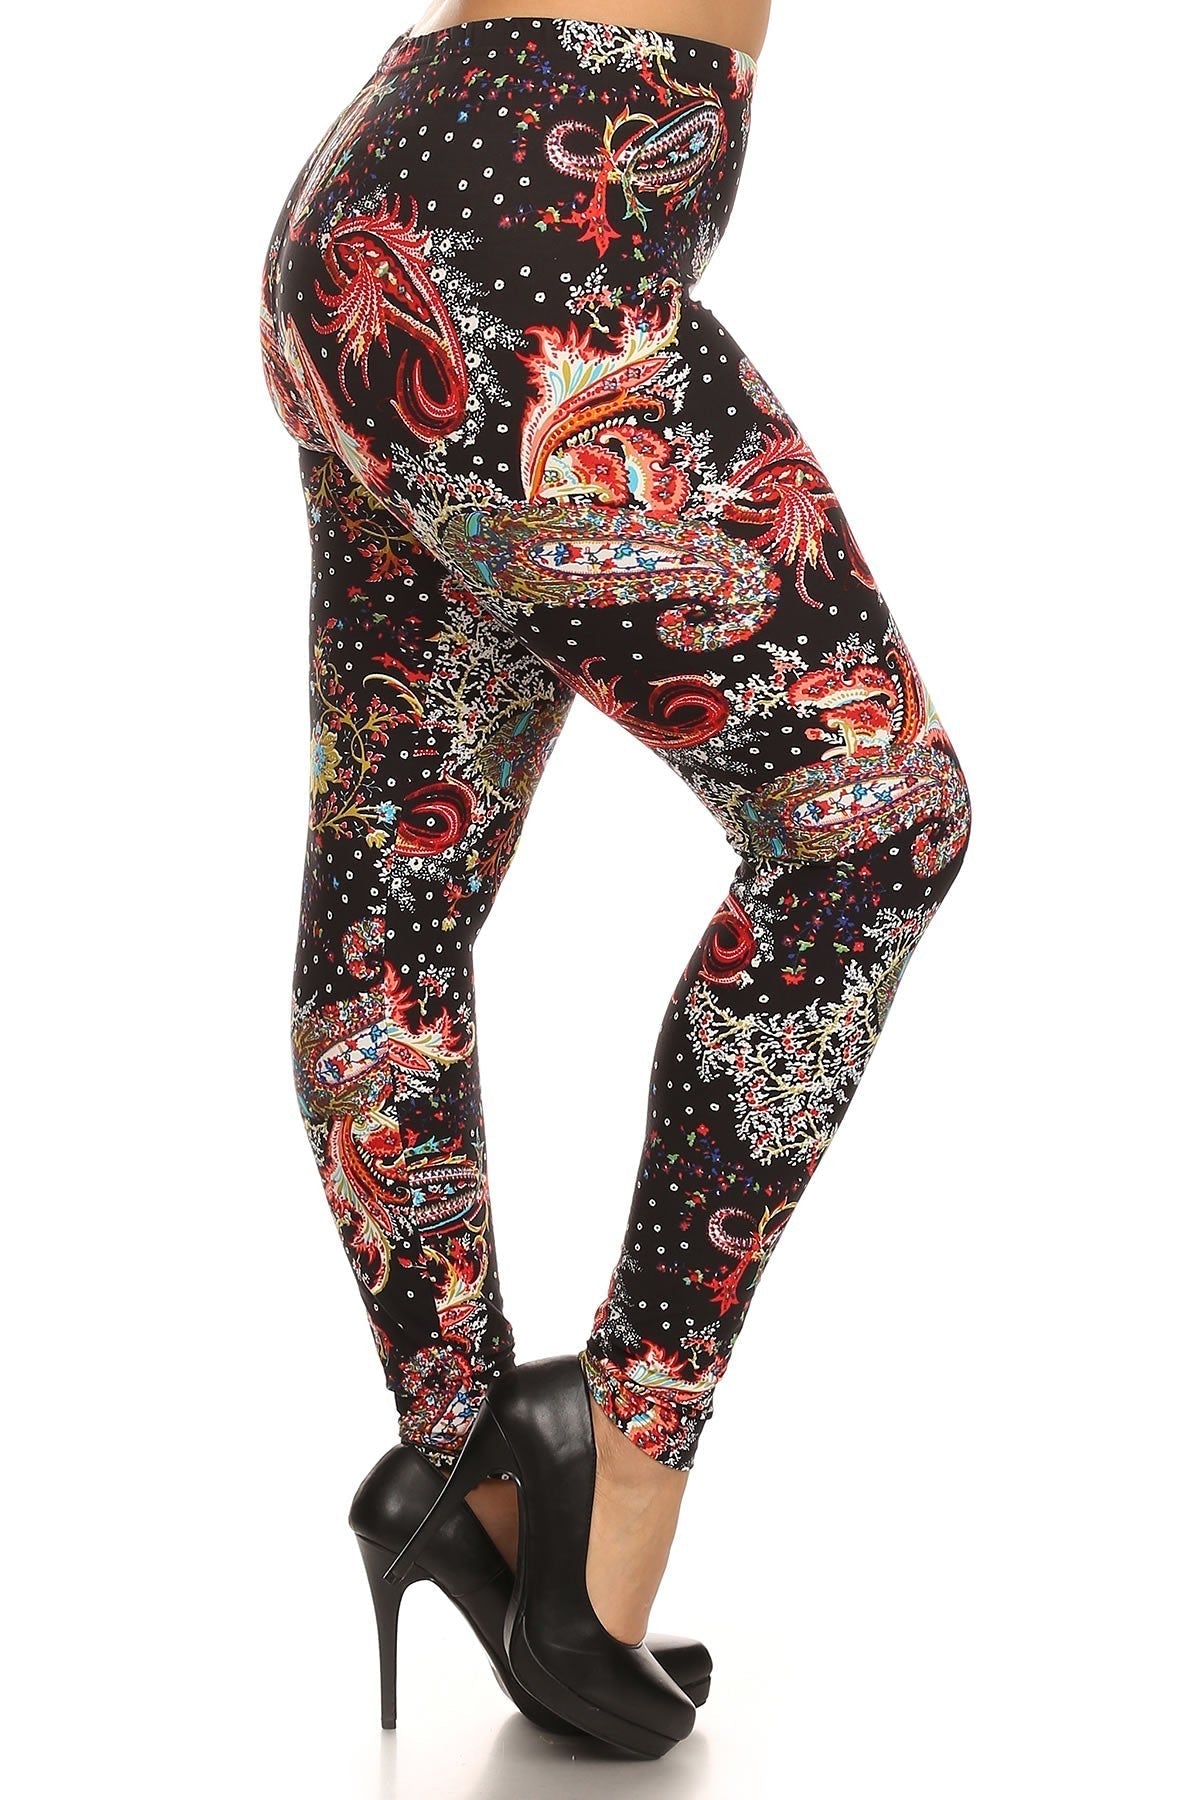 Multi-color Paisley Print, Banded, Full Length Leggings In A Fitted Style With A High Waisted Bottoms jehouze 